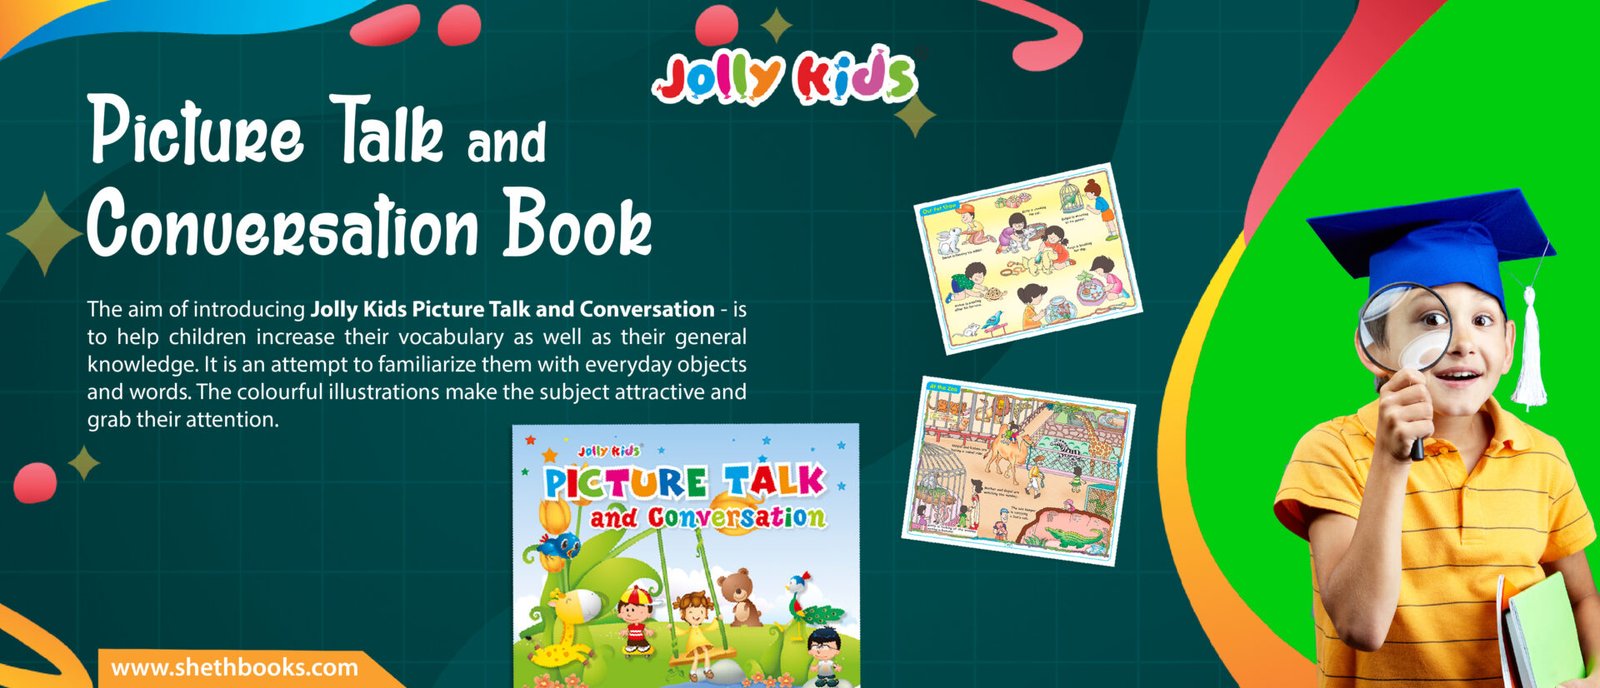 Jolly Kids Picture Talk and Conversation